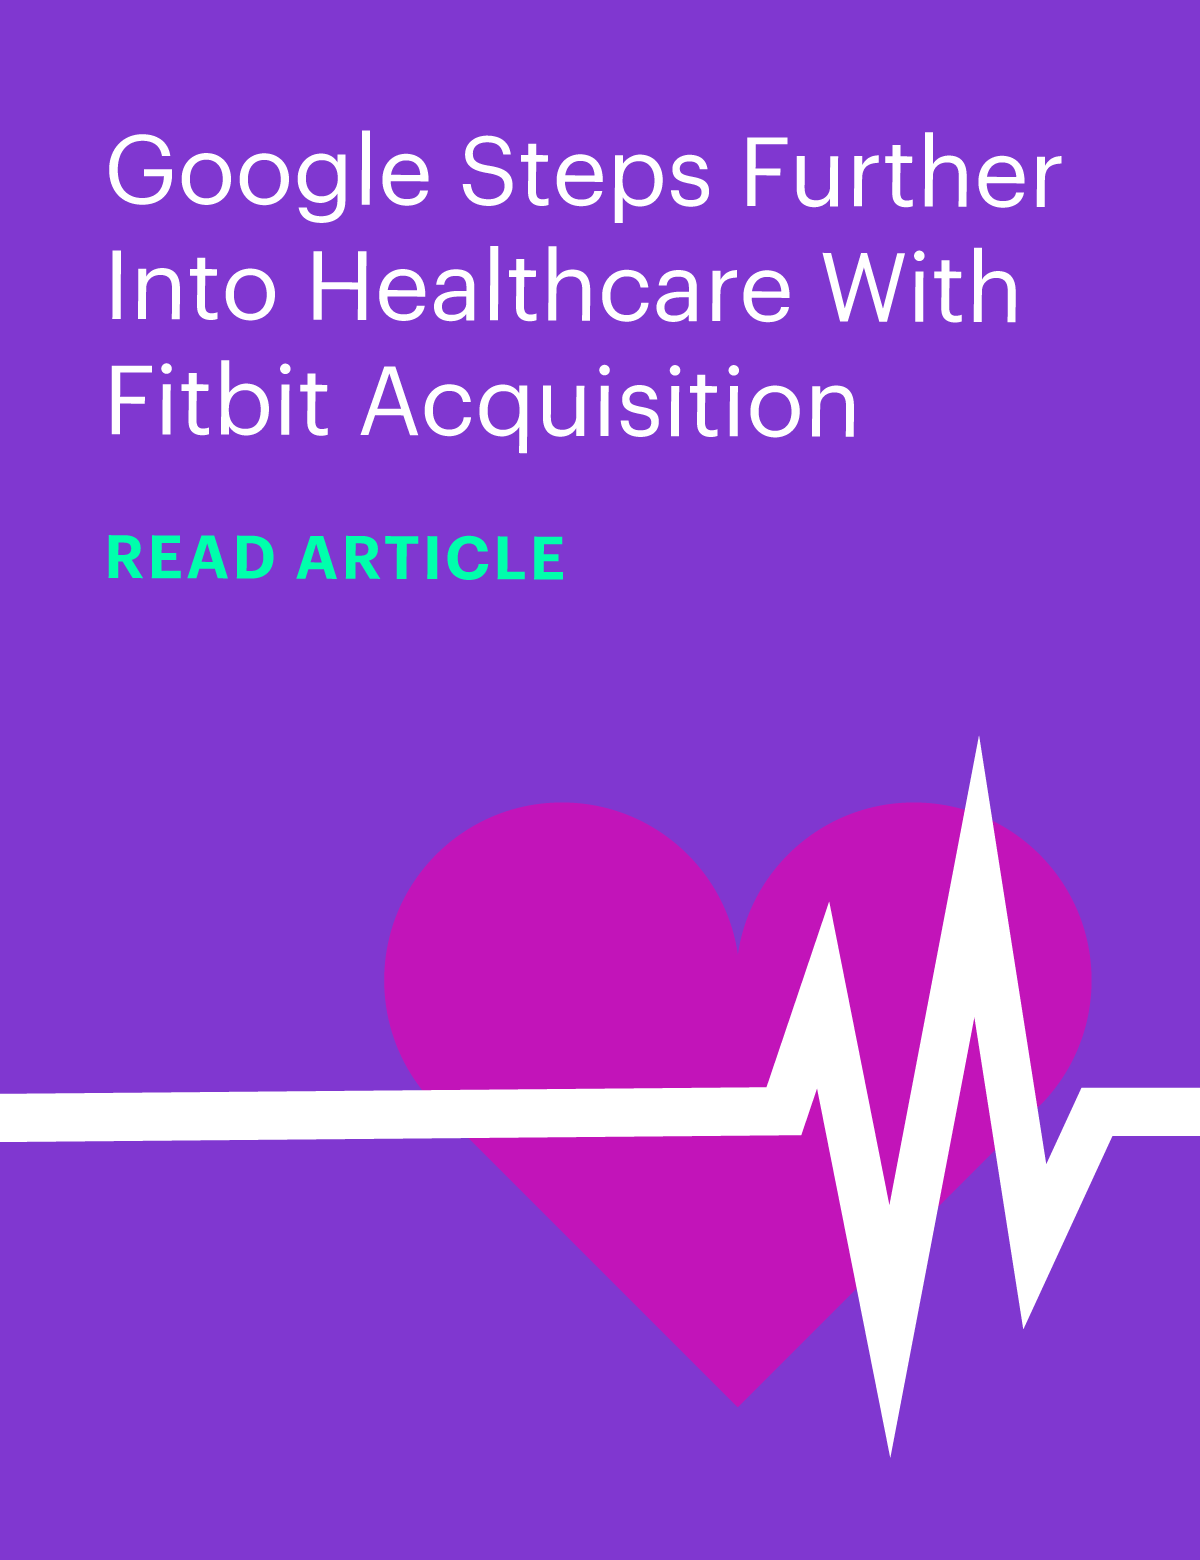 Google Steps Further Into Healthcare With Fitbit Acquisition